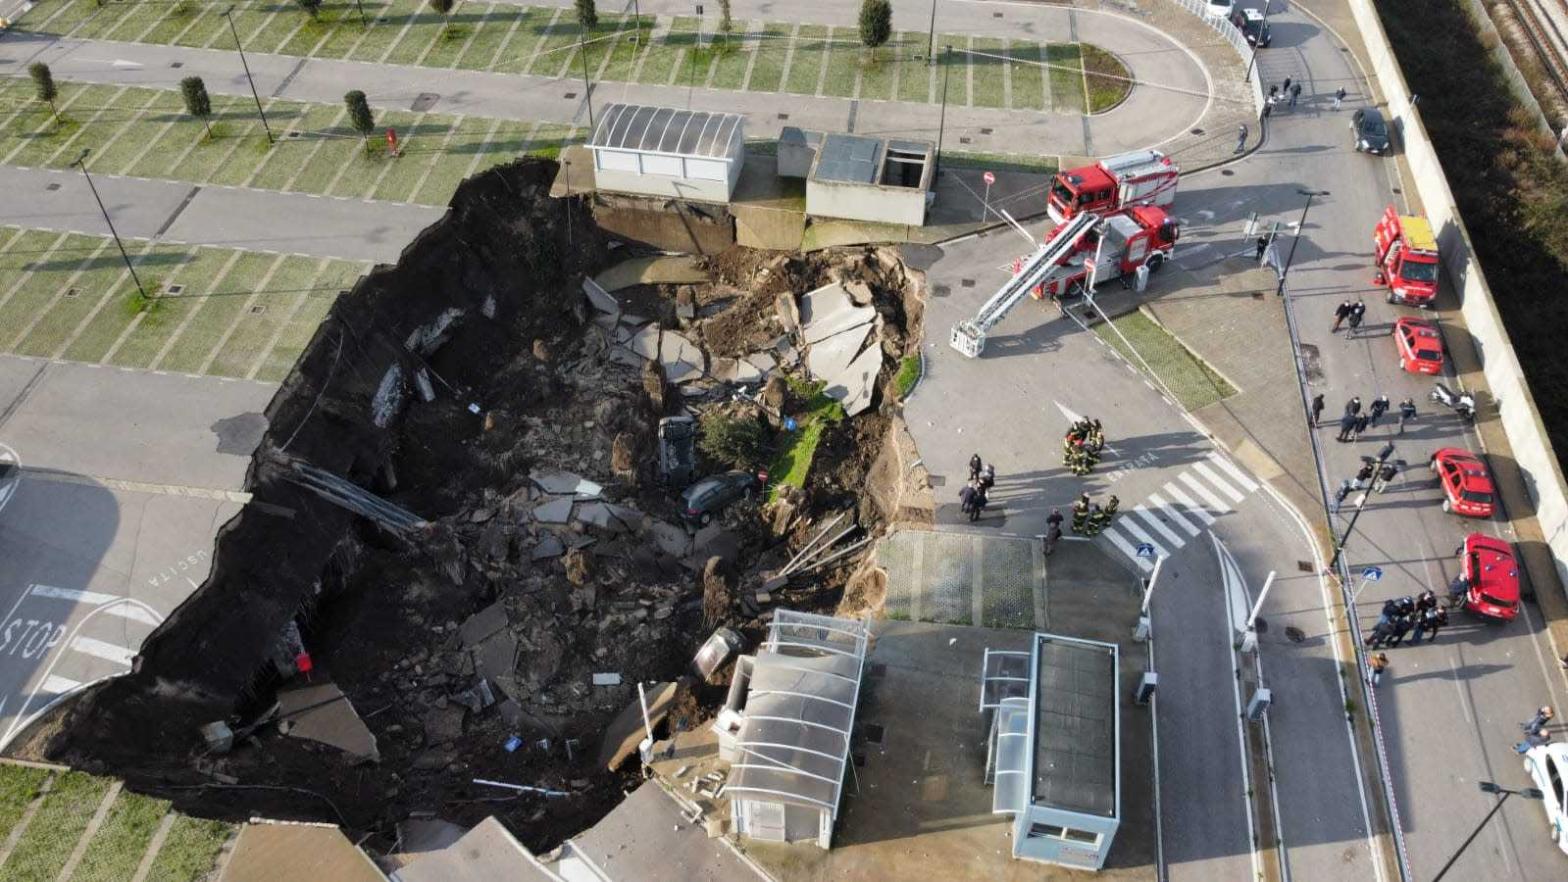 An aerial view shows a sinkhole in the Ospedale del Mare hospital car park. (Photo: Ciro Fusco, Getty Images)